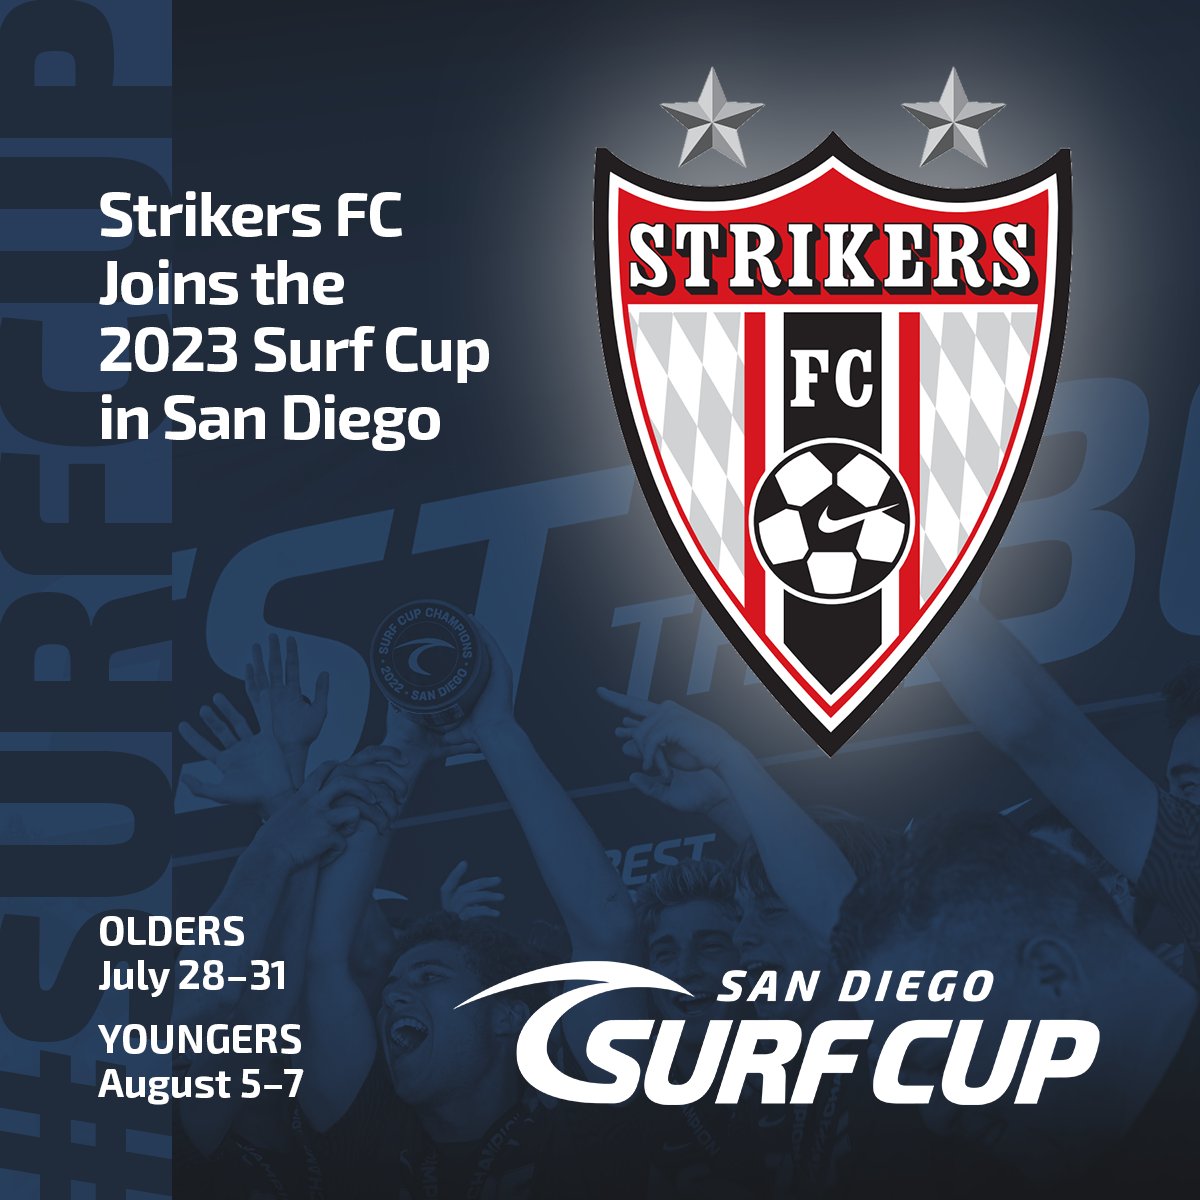 #SurfCup is thrilled to welcome @strikersfcirvine to our 2023 Surf Cup in San Diego, CA! With applications through the roof, we're gearing up to host the nation's top clubs and huge matchups! We cannot wait to hand out the 🏆 to the #BestOfTheBest!